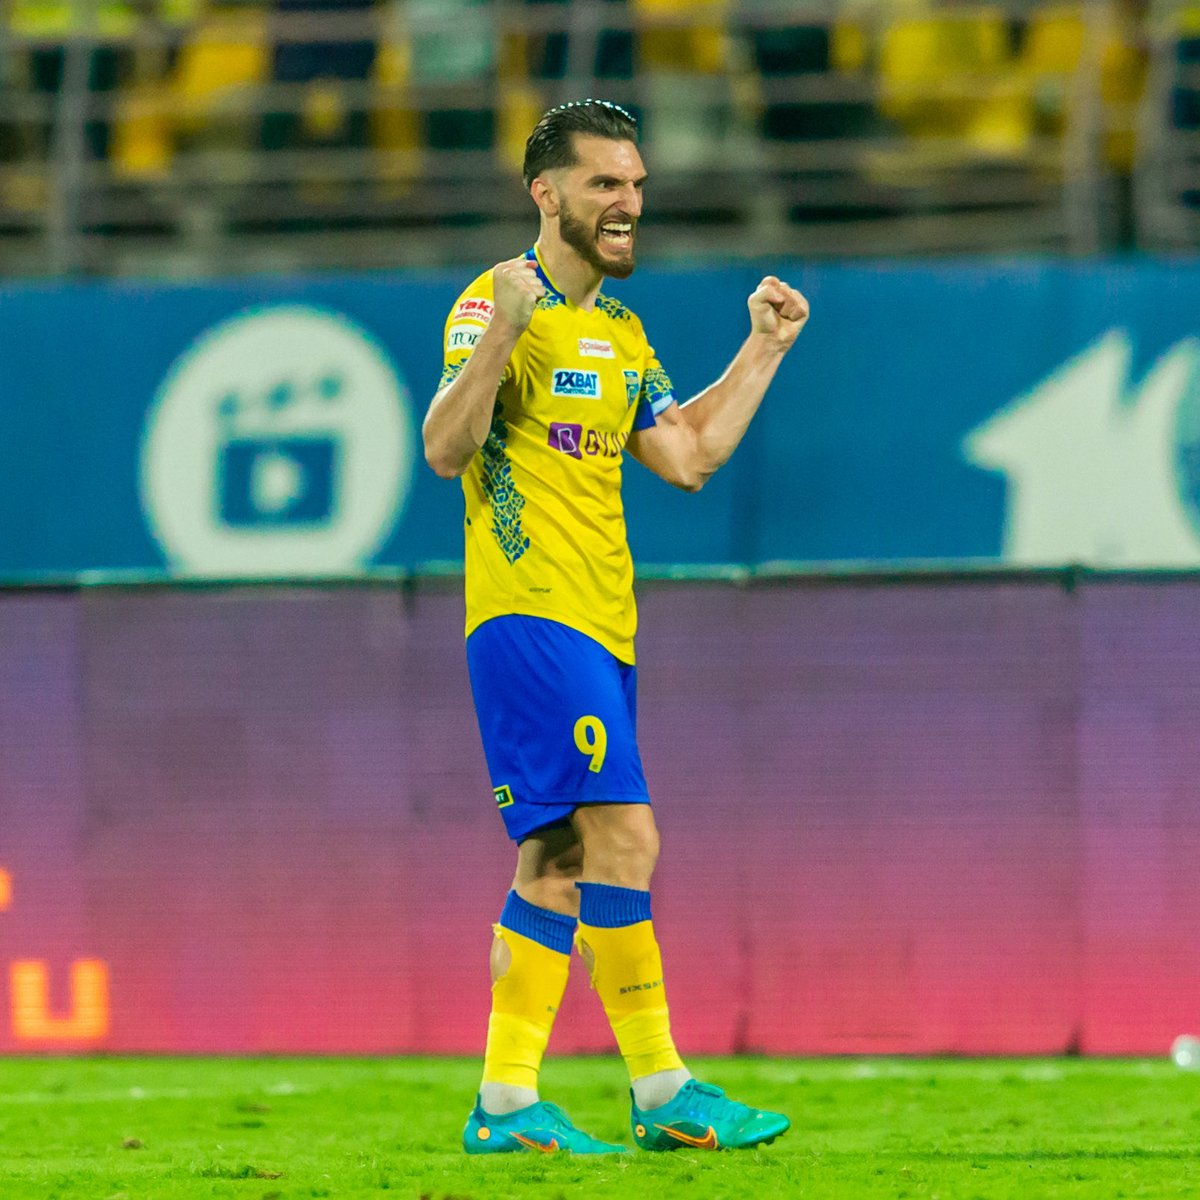 East Bengal FC are currently in advanced talks to sign ISL 23/24 Golden Boot winner Dimitrios Diamantakos, we can confirm ✍️ Dimi had offers from atleast 3 clubs in India (incl KBFC), renewal offer from KBFC didn’t meet the players expectations